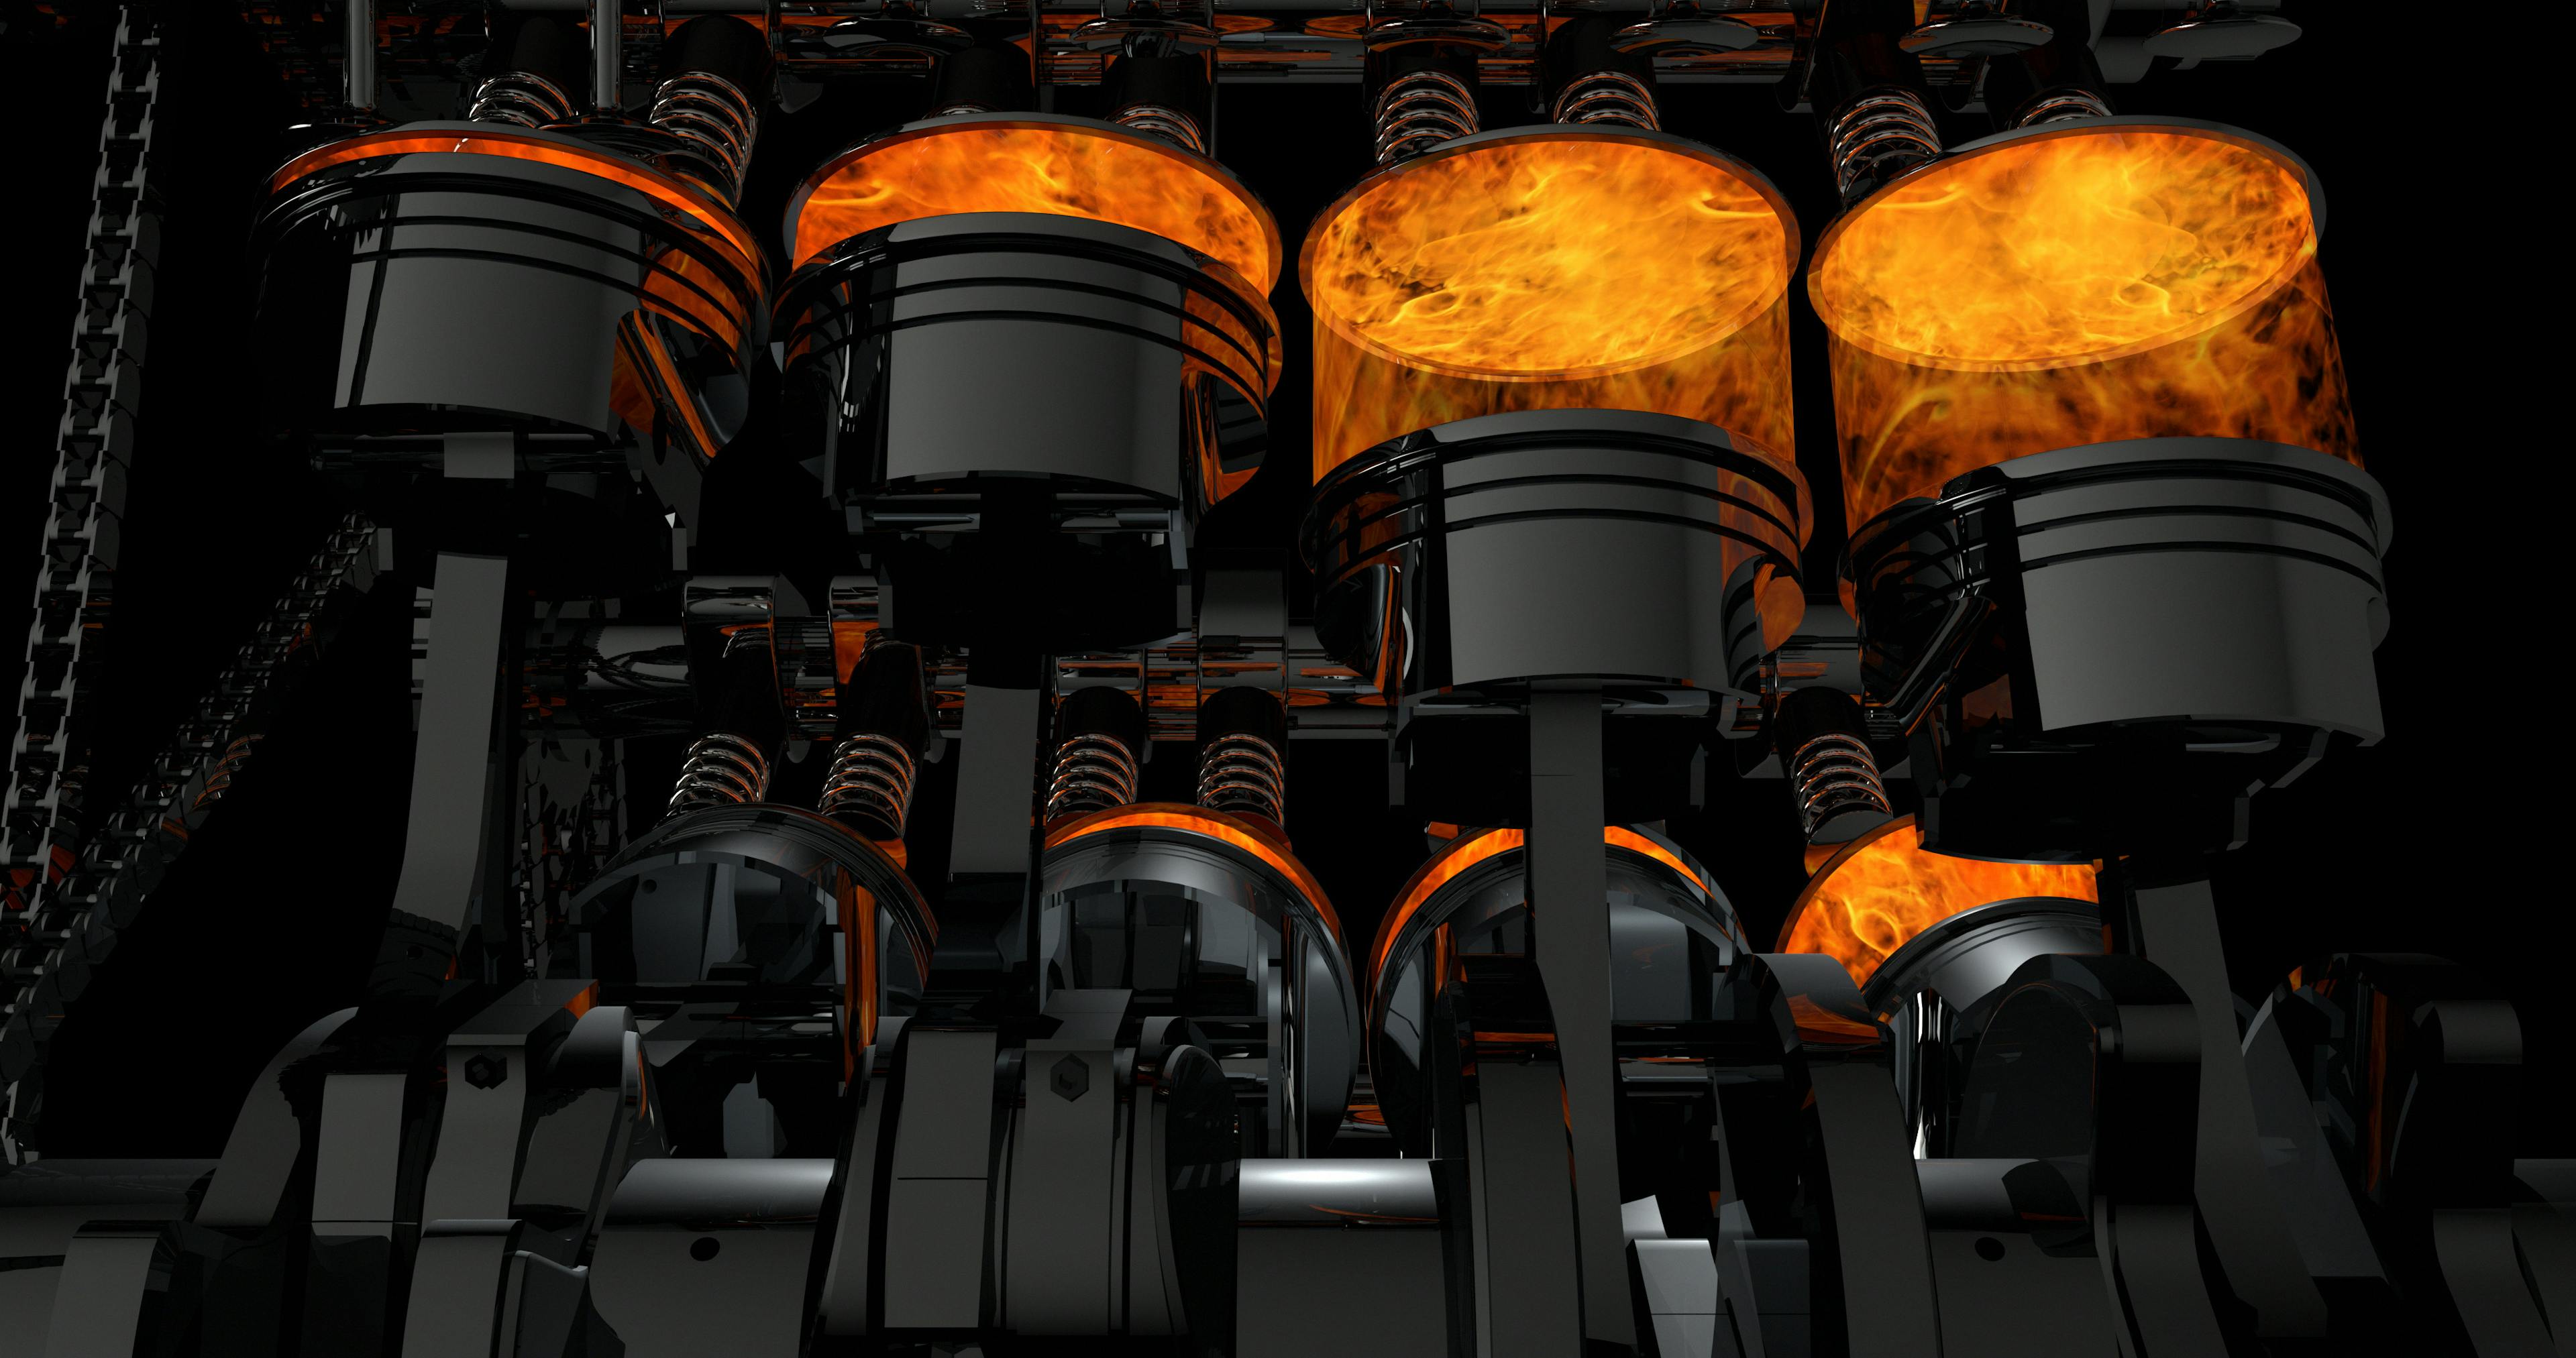 3D model of a working V8 engine. Pistons and other mechanical parts are in motion.